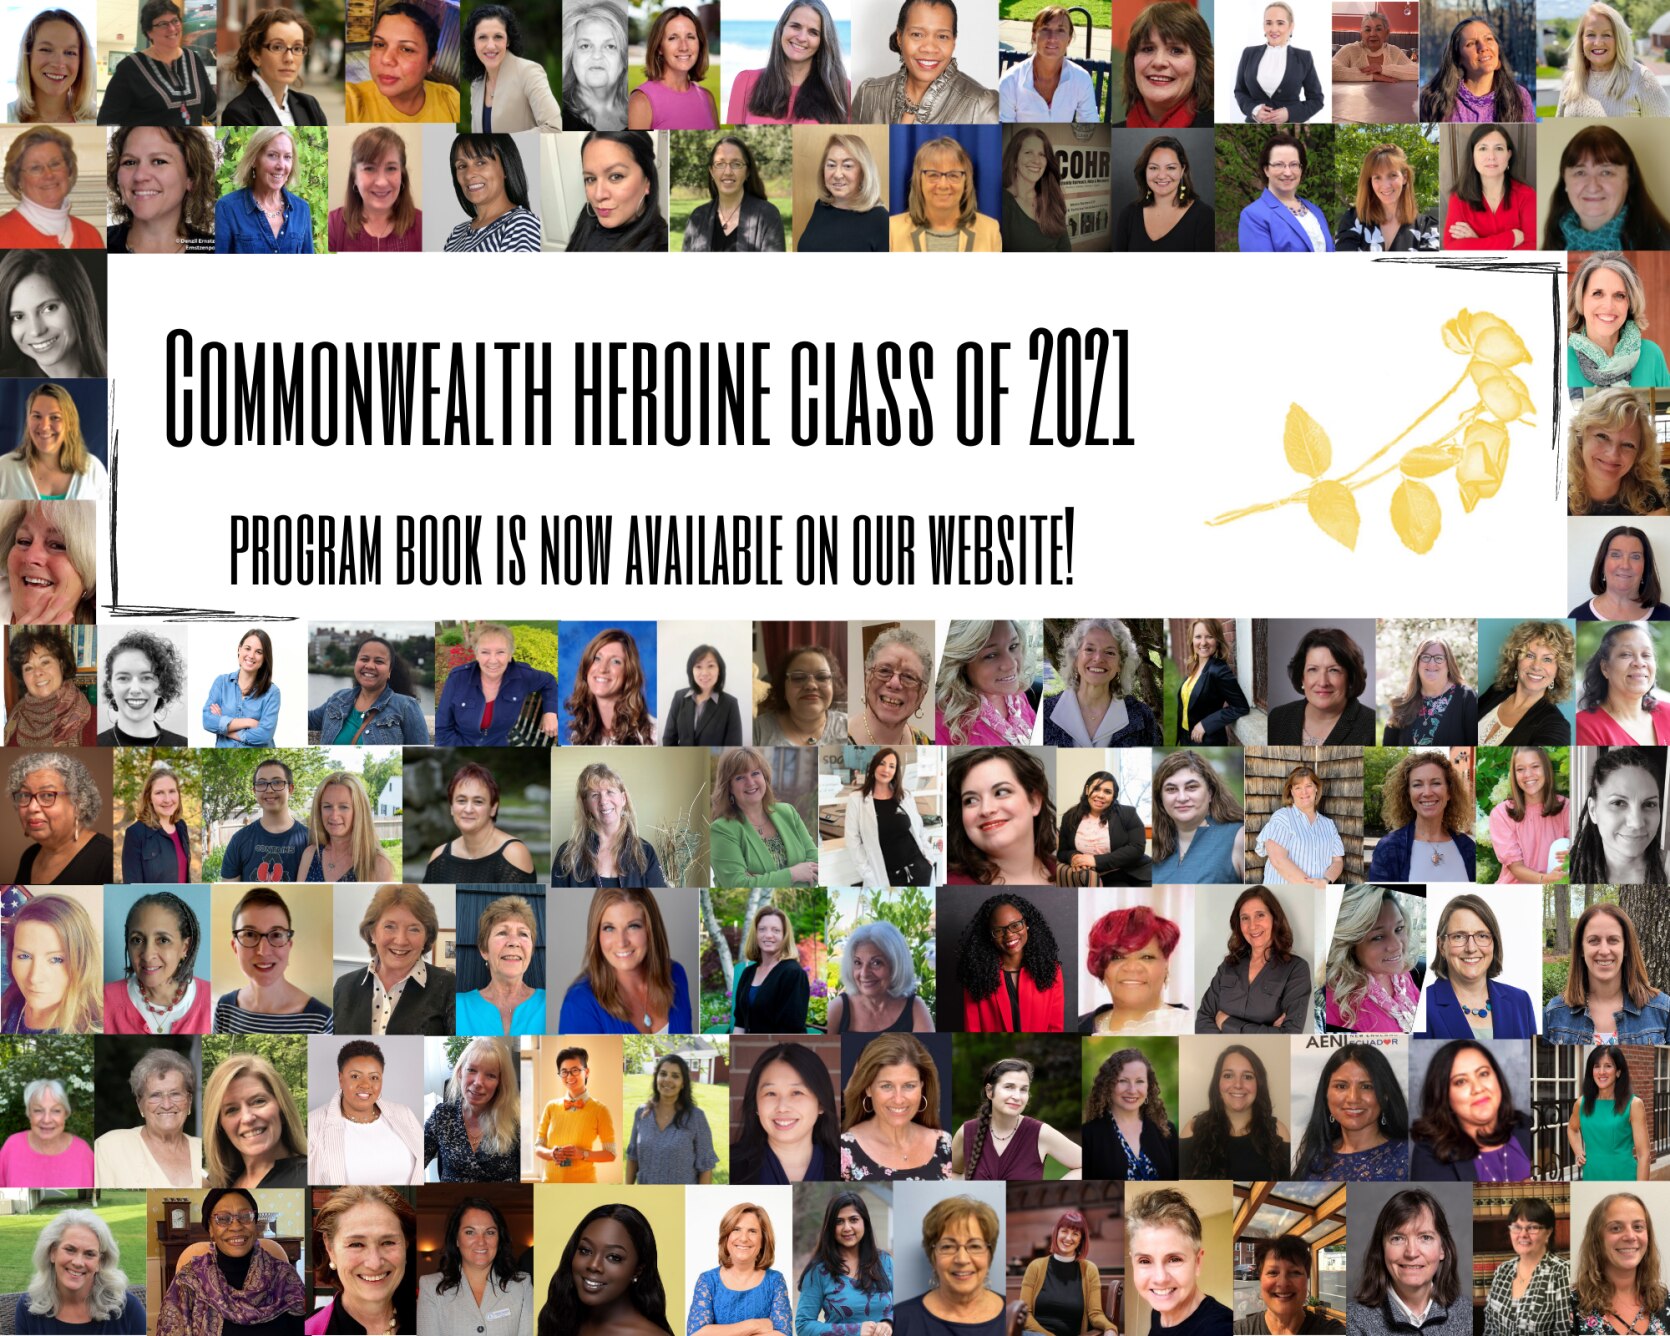 Collage photo of the Commonwealth Heroine Class of 2021 submitted photos, with text that reads "Commonwealth Heroine Class of 2021: Program book available now!" with the unsung yellow rose to the right.